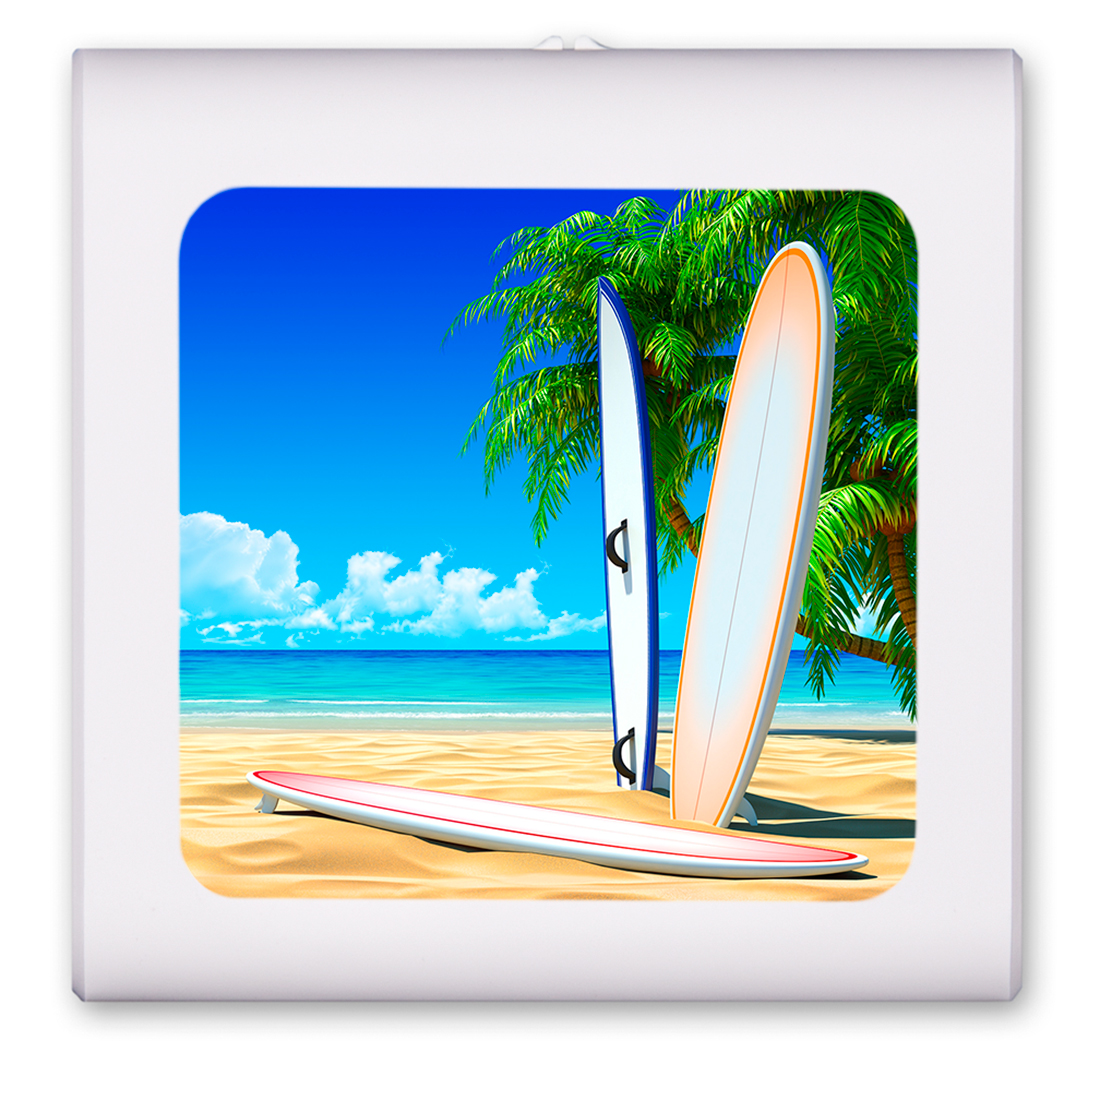 Surf Boards on the Beach - #2814